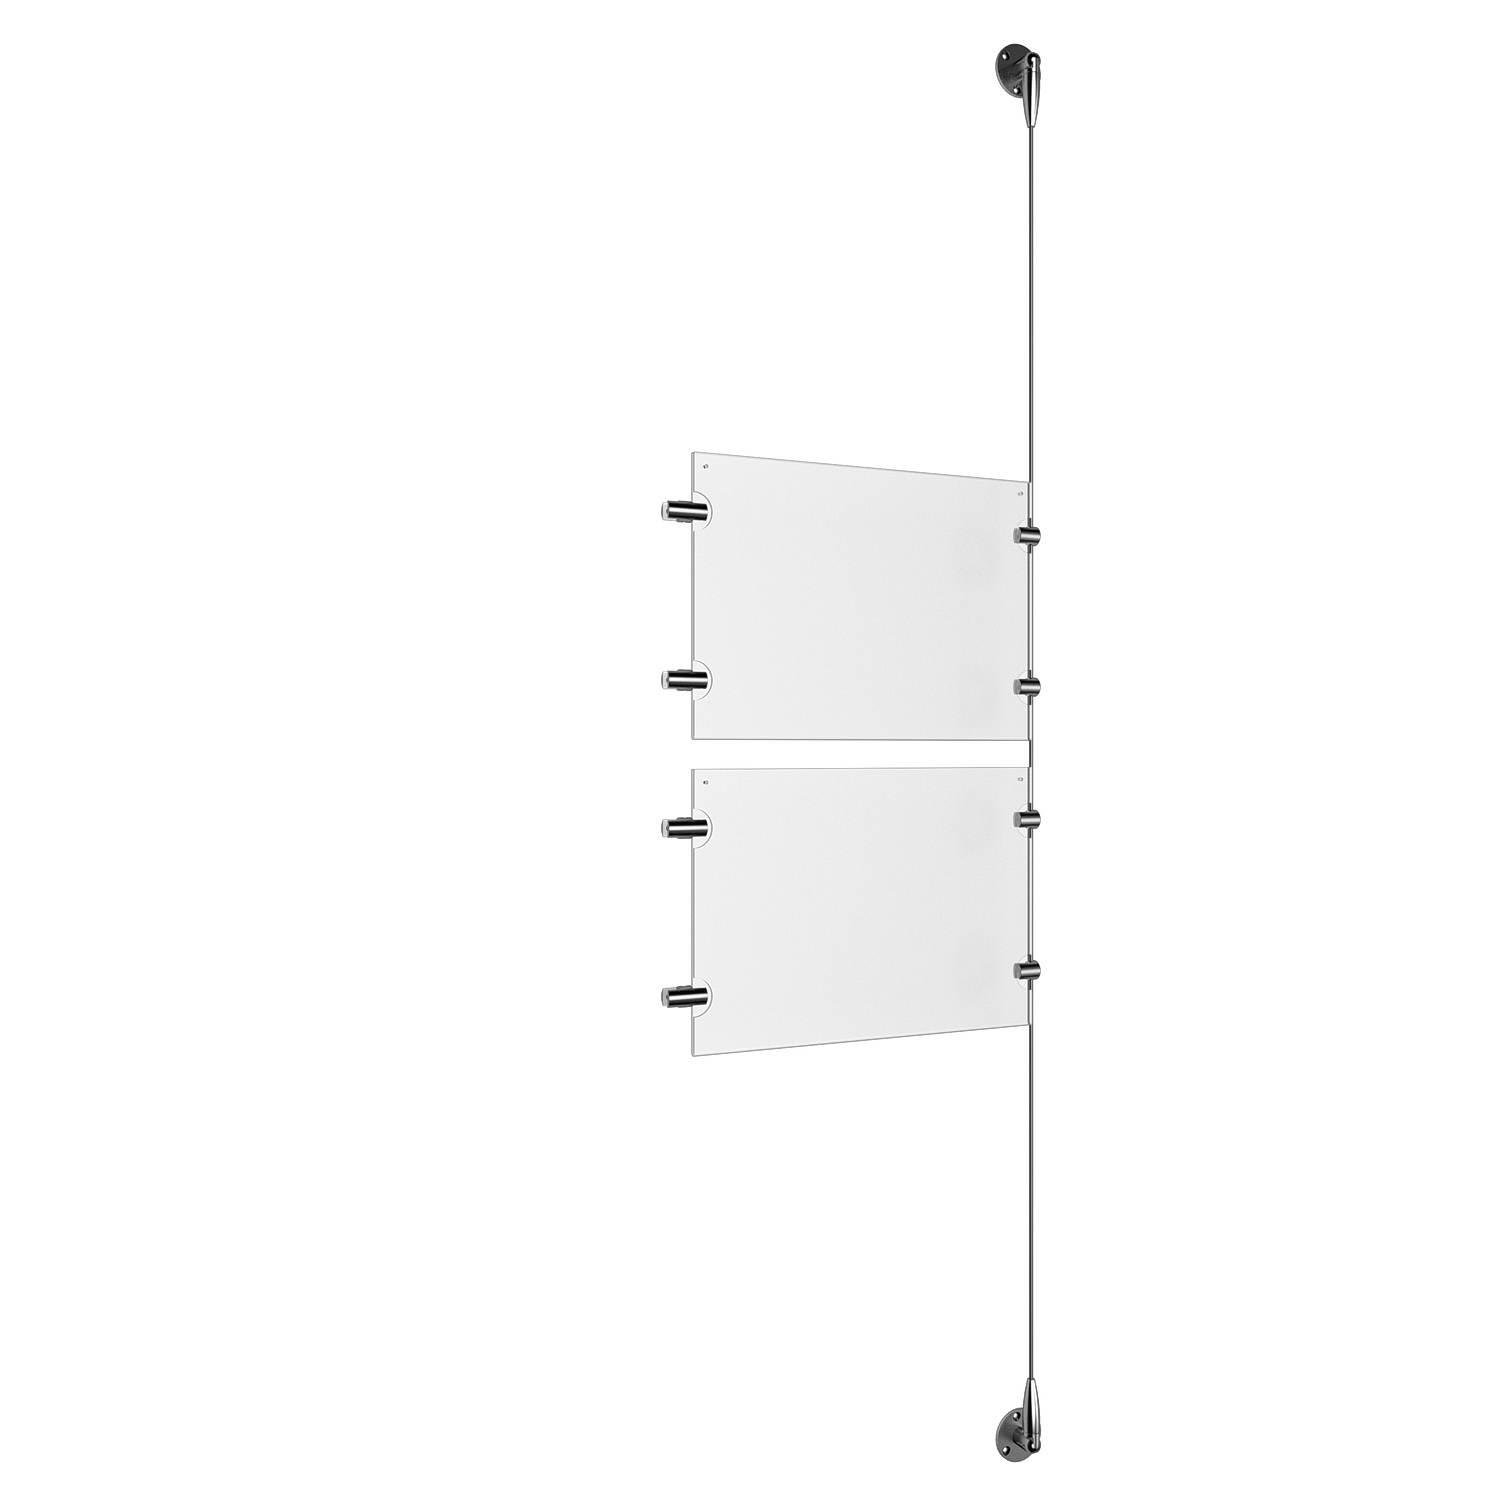 (2) 11'' Width x 8-1/2'' Height Clear Acrylic Frame & (1) Stainless Steel Satin Brushed Adjustable Angle Signature 1/8'' Cable Systems with (4) Single-Sided Panel Grippers (4) Double-Sided Panel Grippers